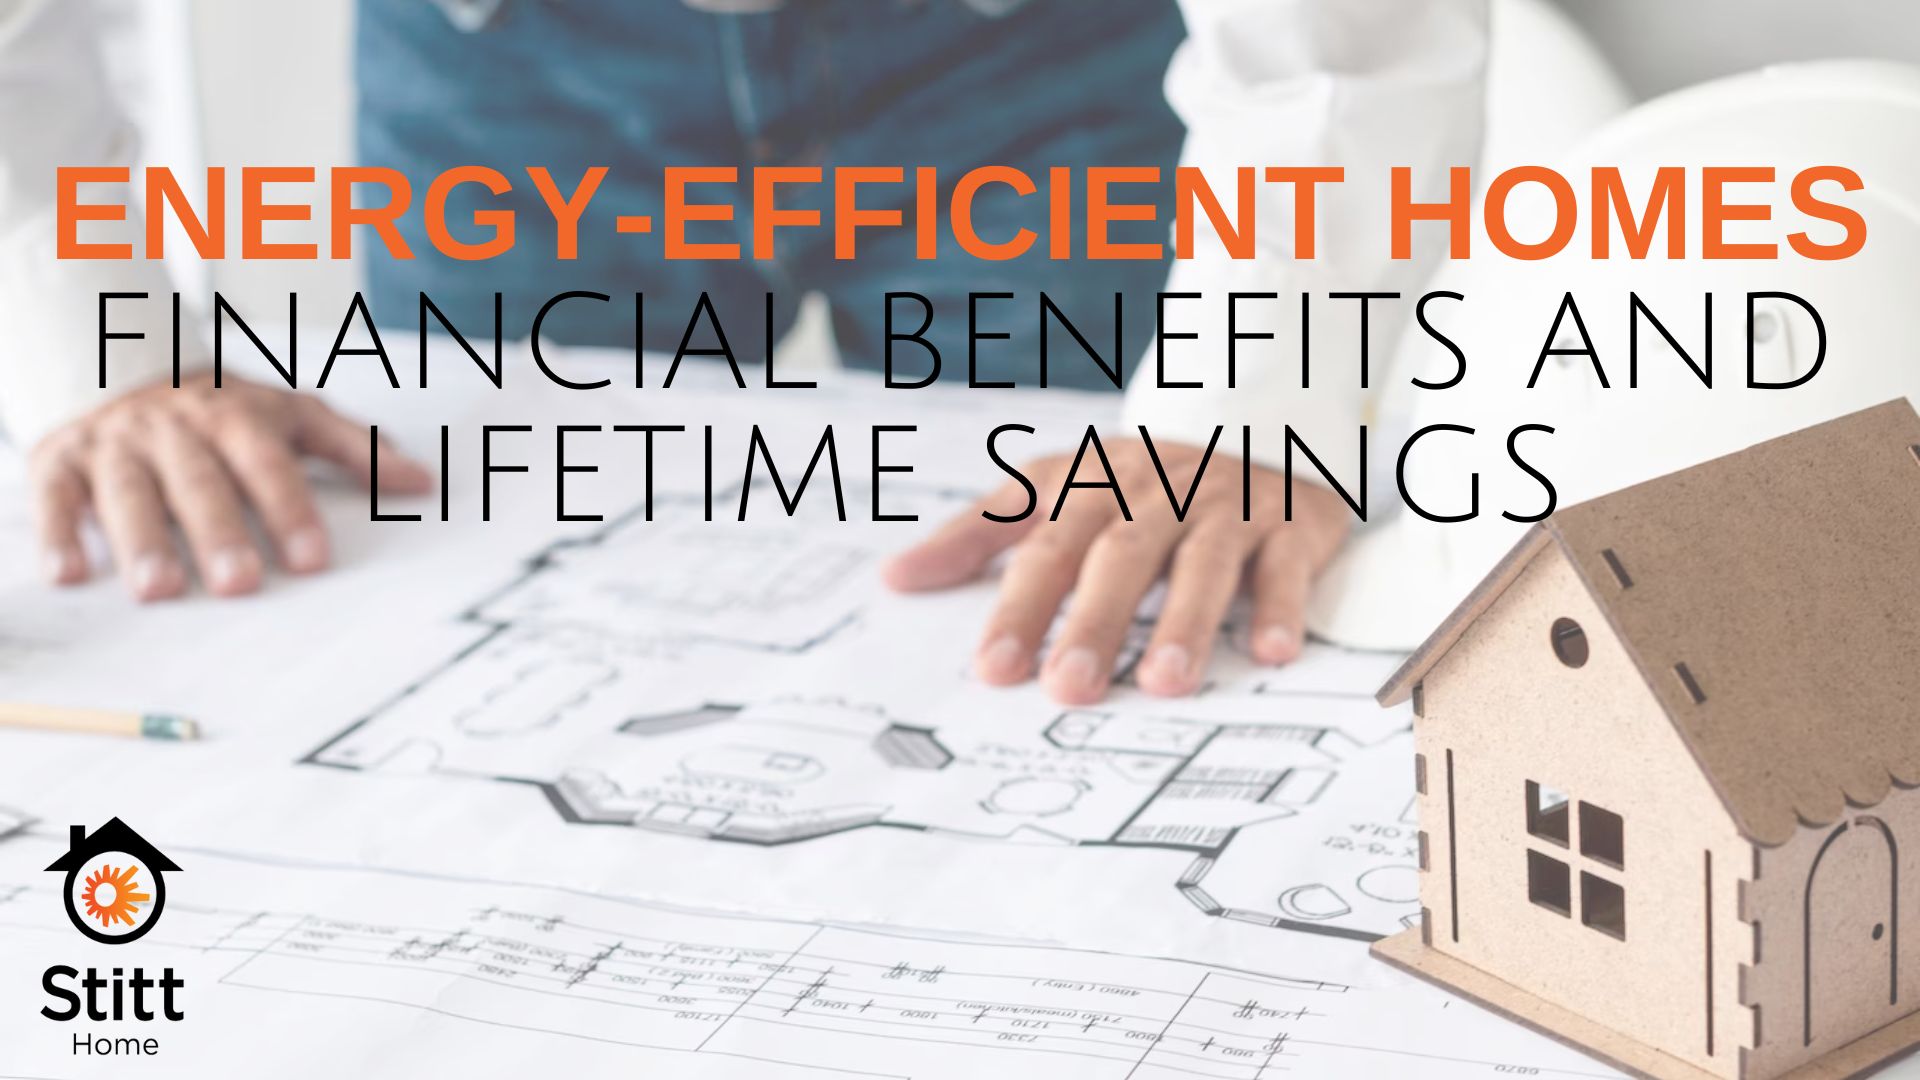 Energy-efficient homes, more affordable than you think.